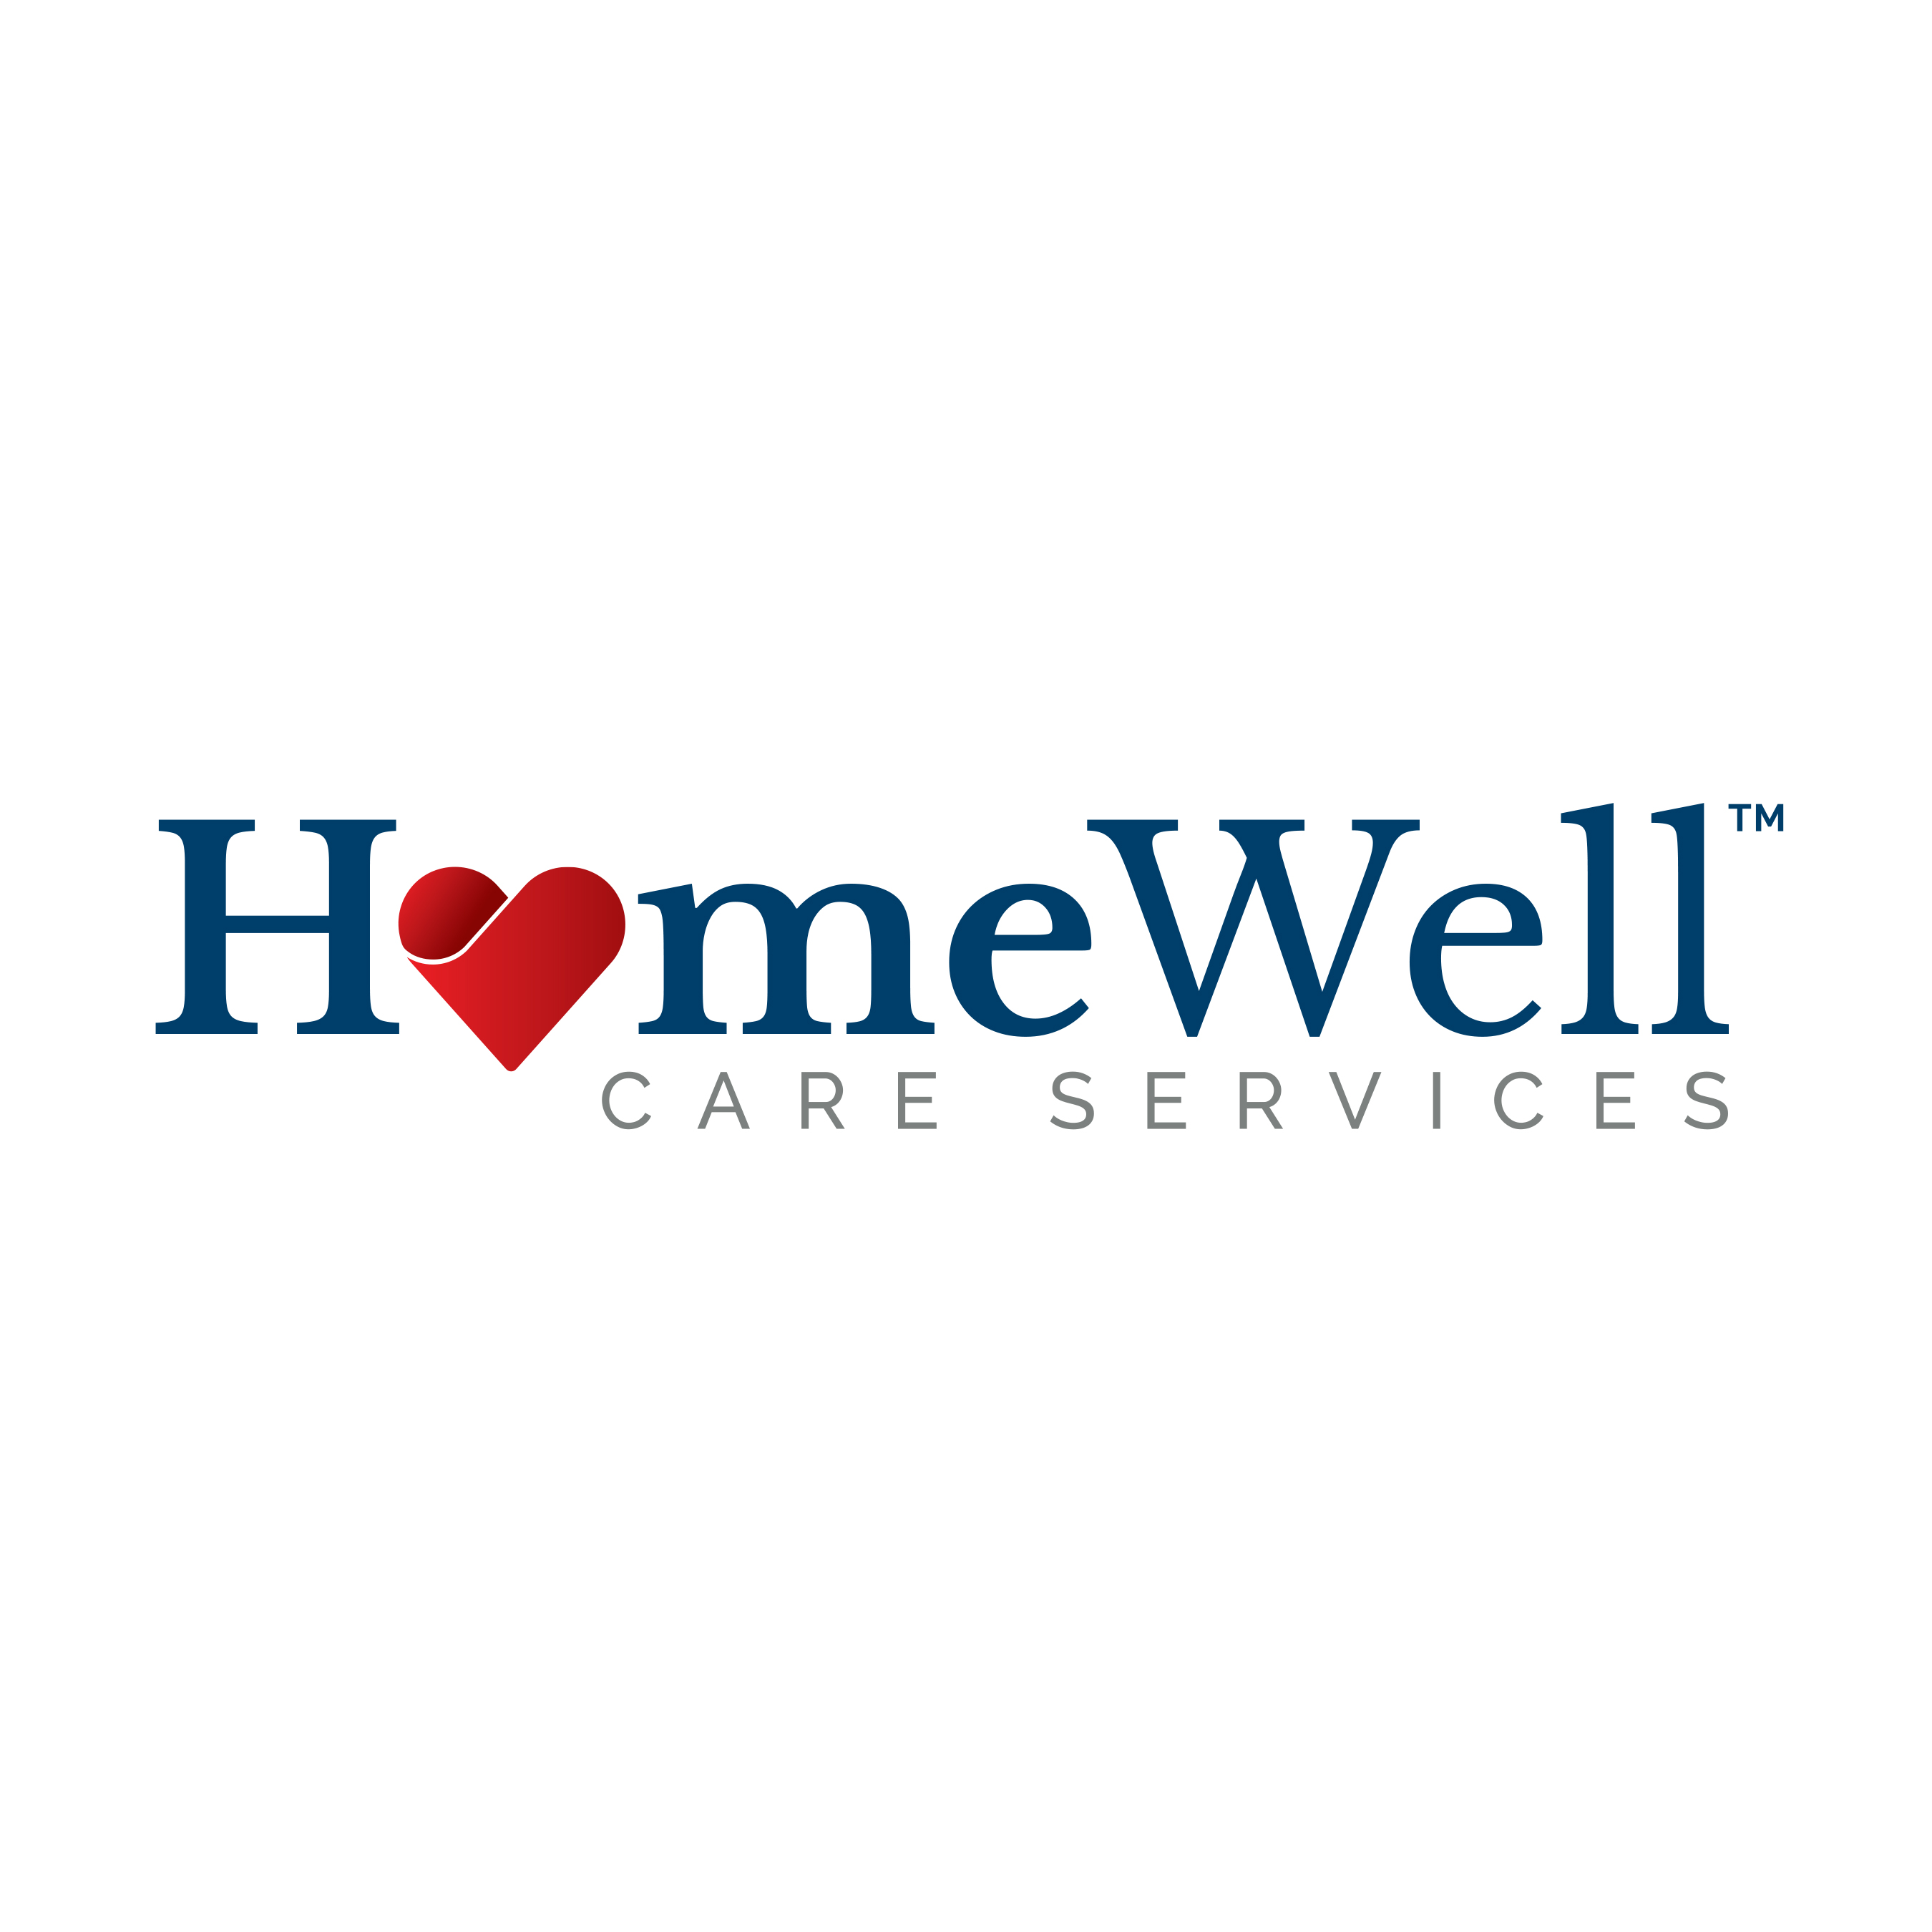 HomeWell Care Services of Charlotte NC image